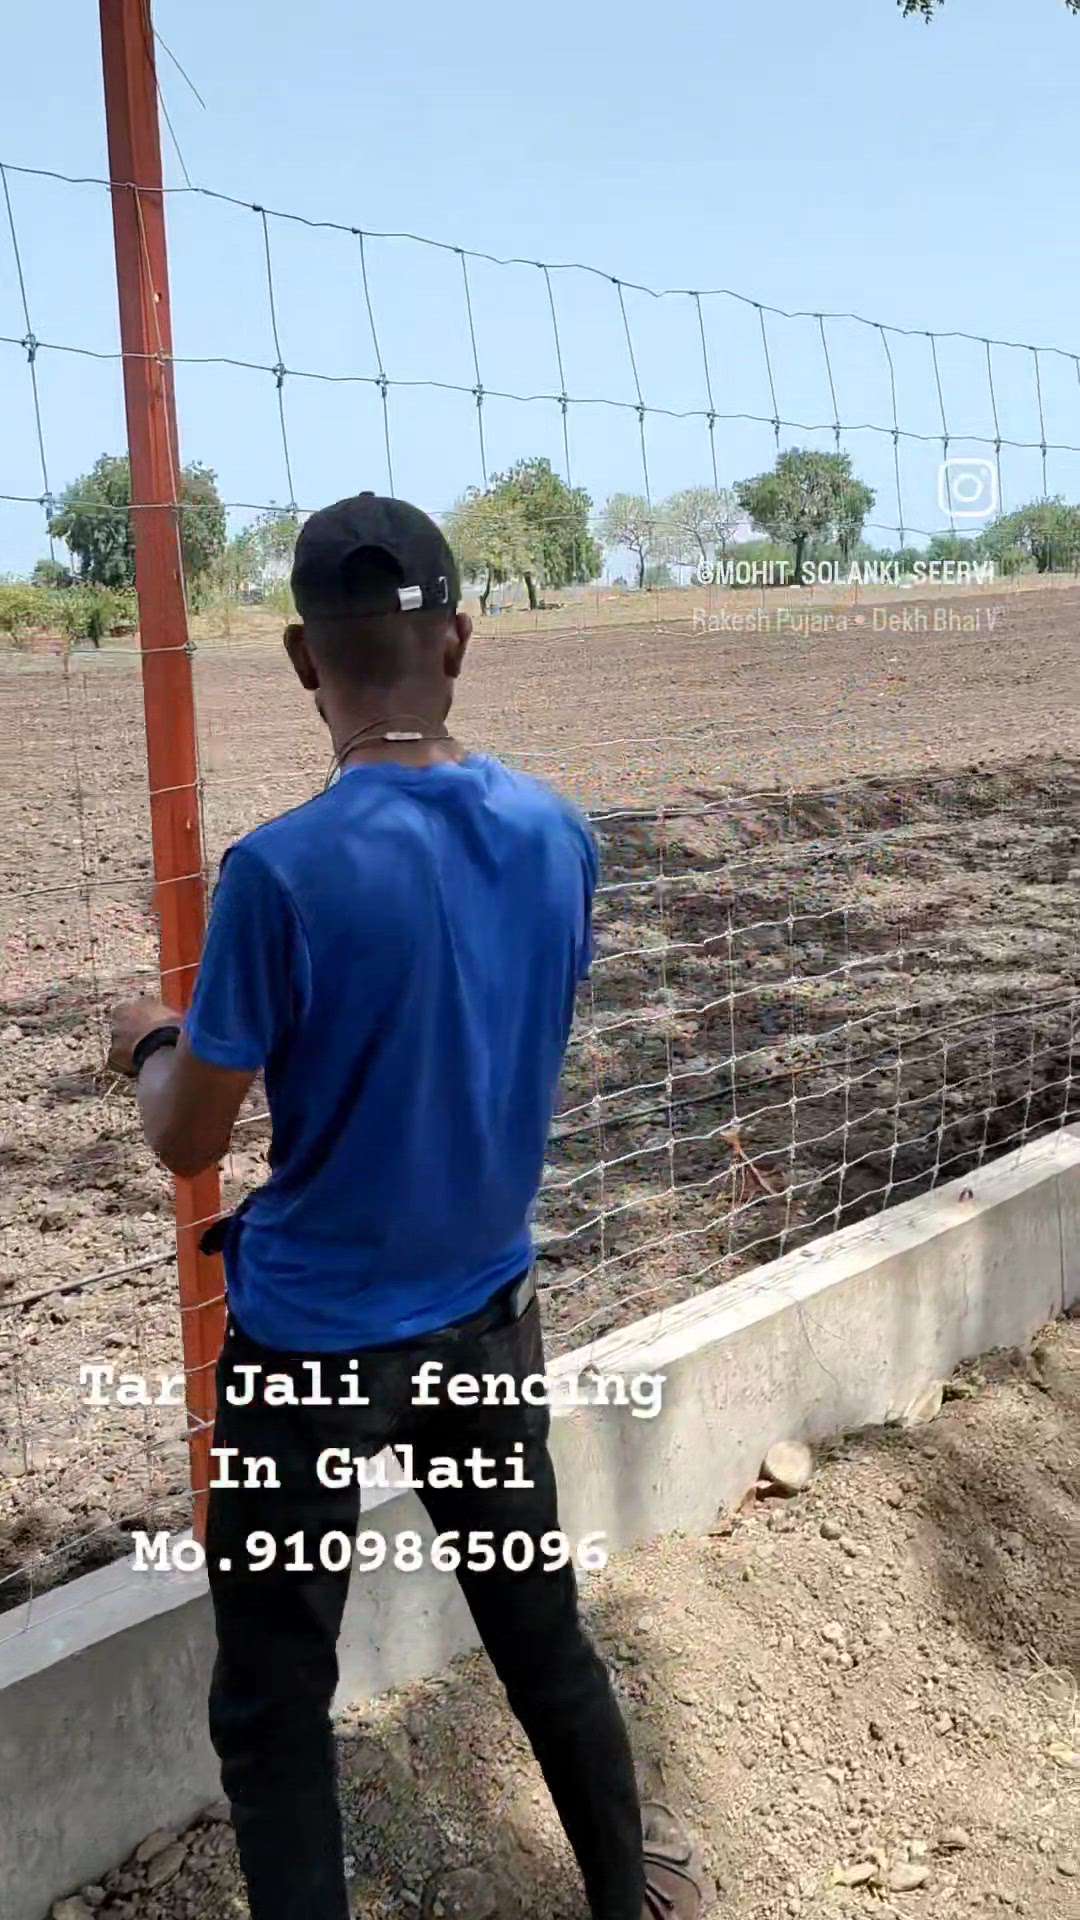 Tar Jali fencing in dhar city mo.9109865096